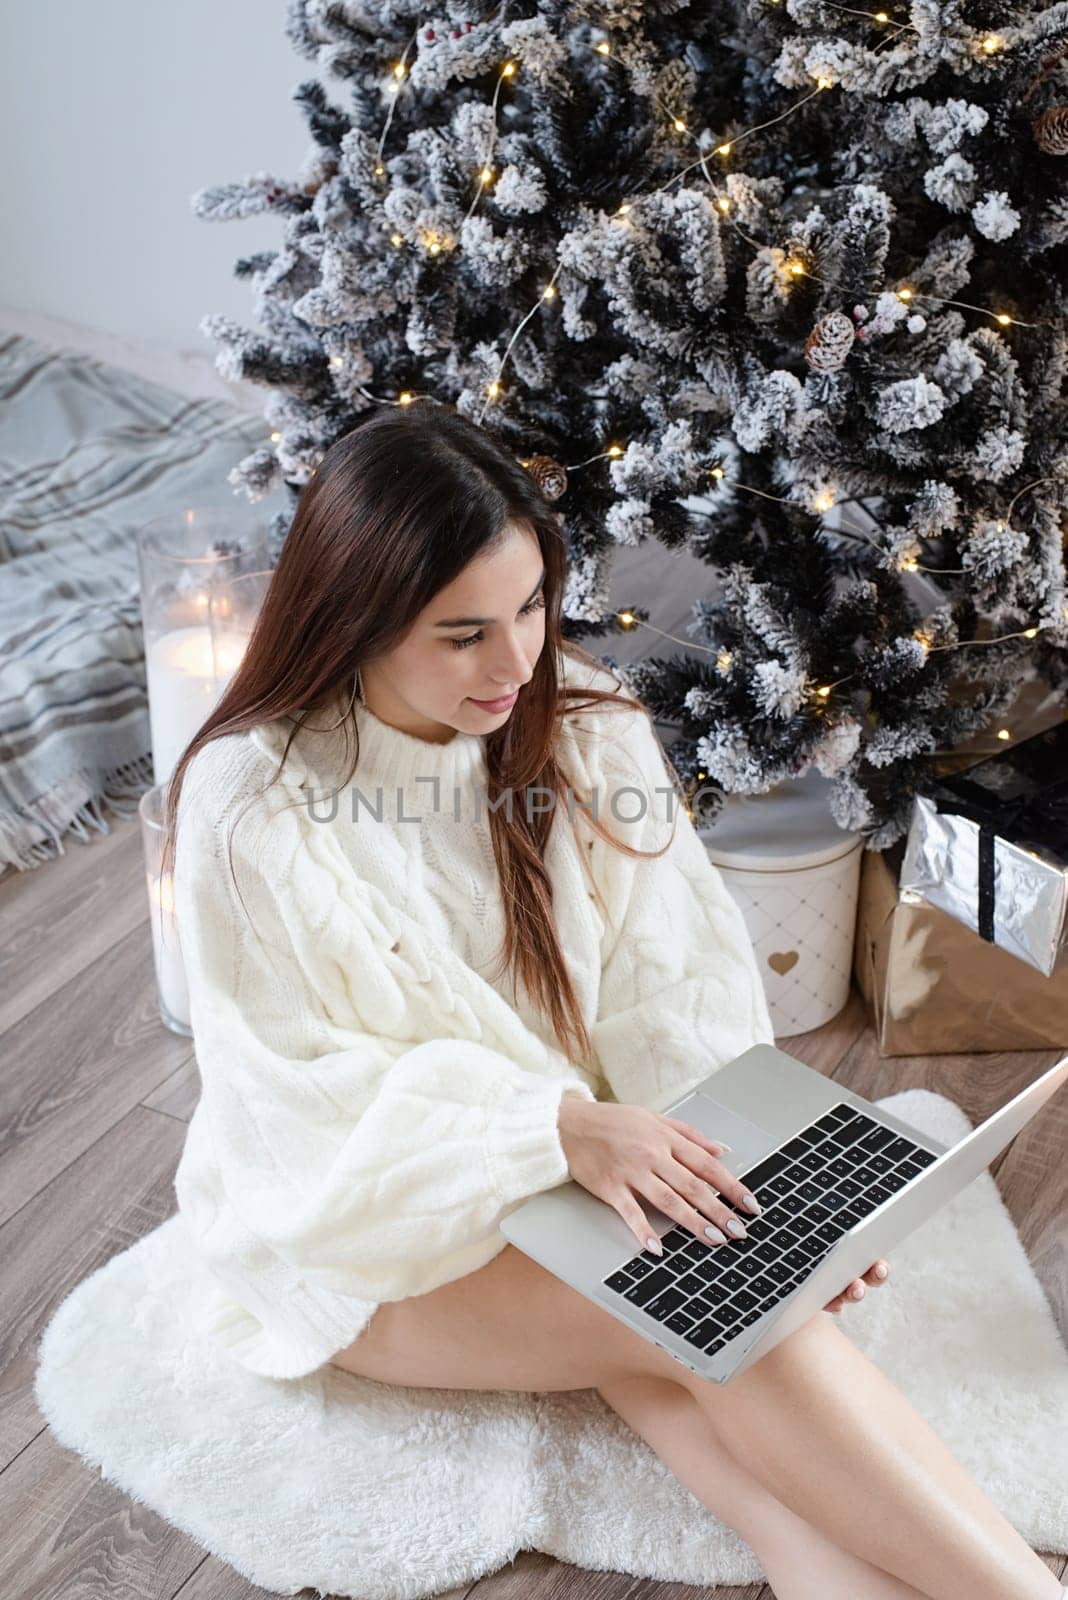 Merry Christmas and Happy New Year. Woman in warm white winter sweater lying in bed at home using laptop, watching movies or working